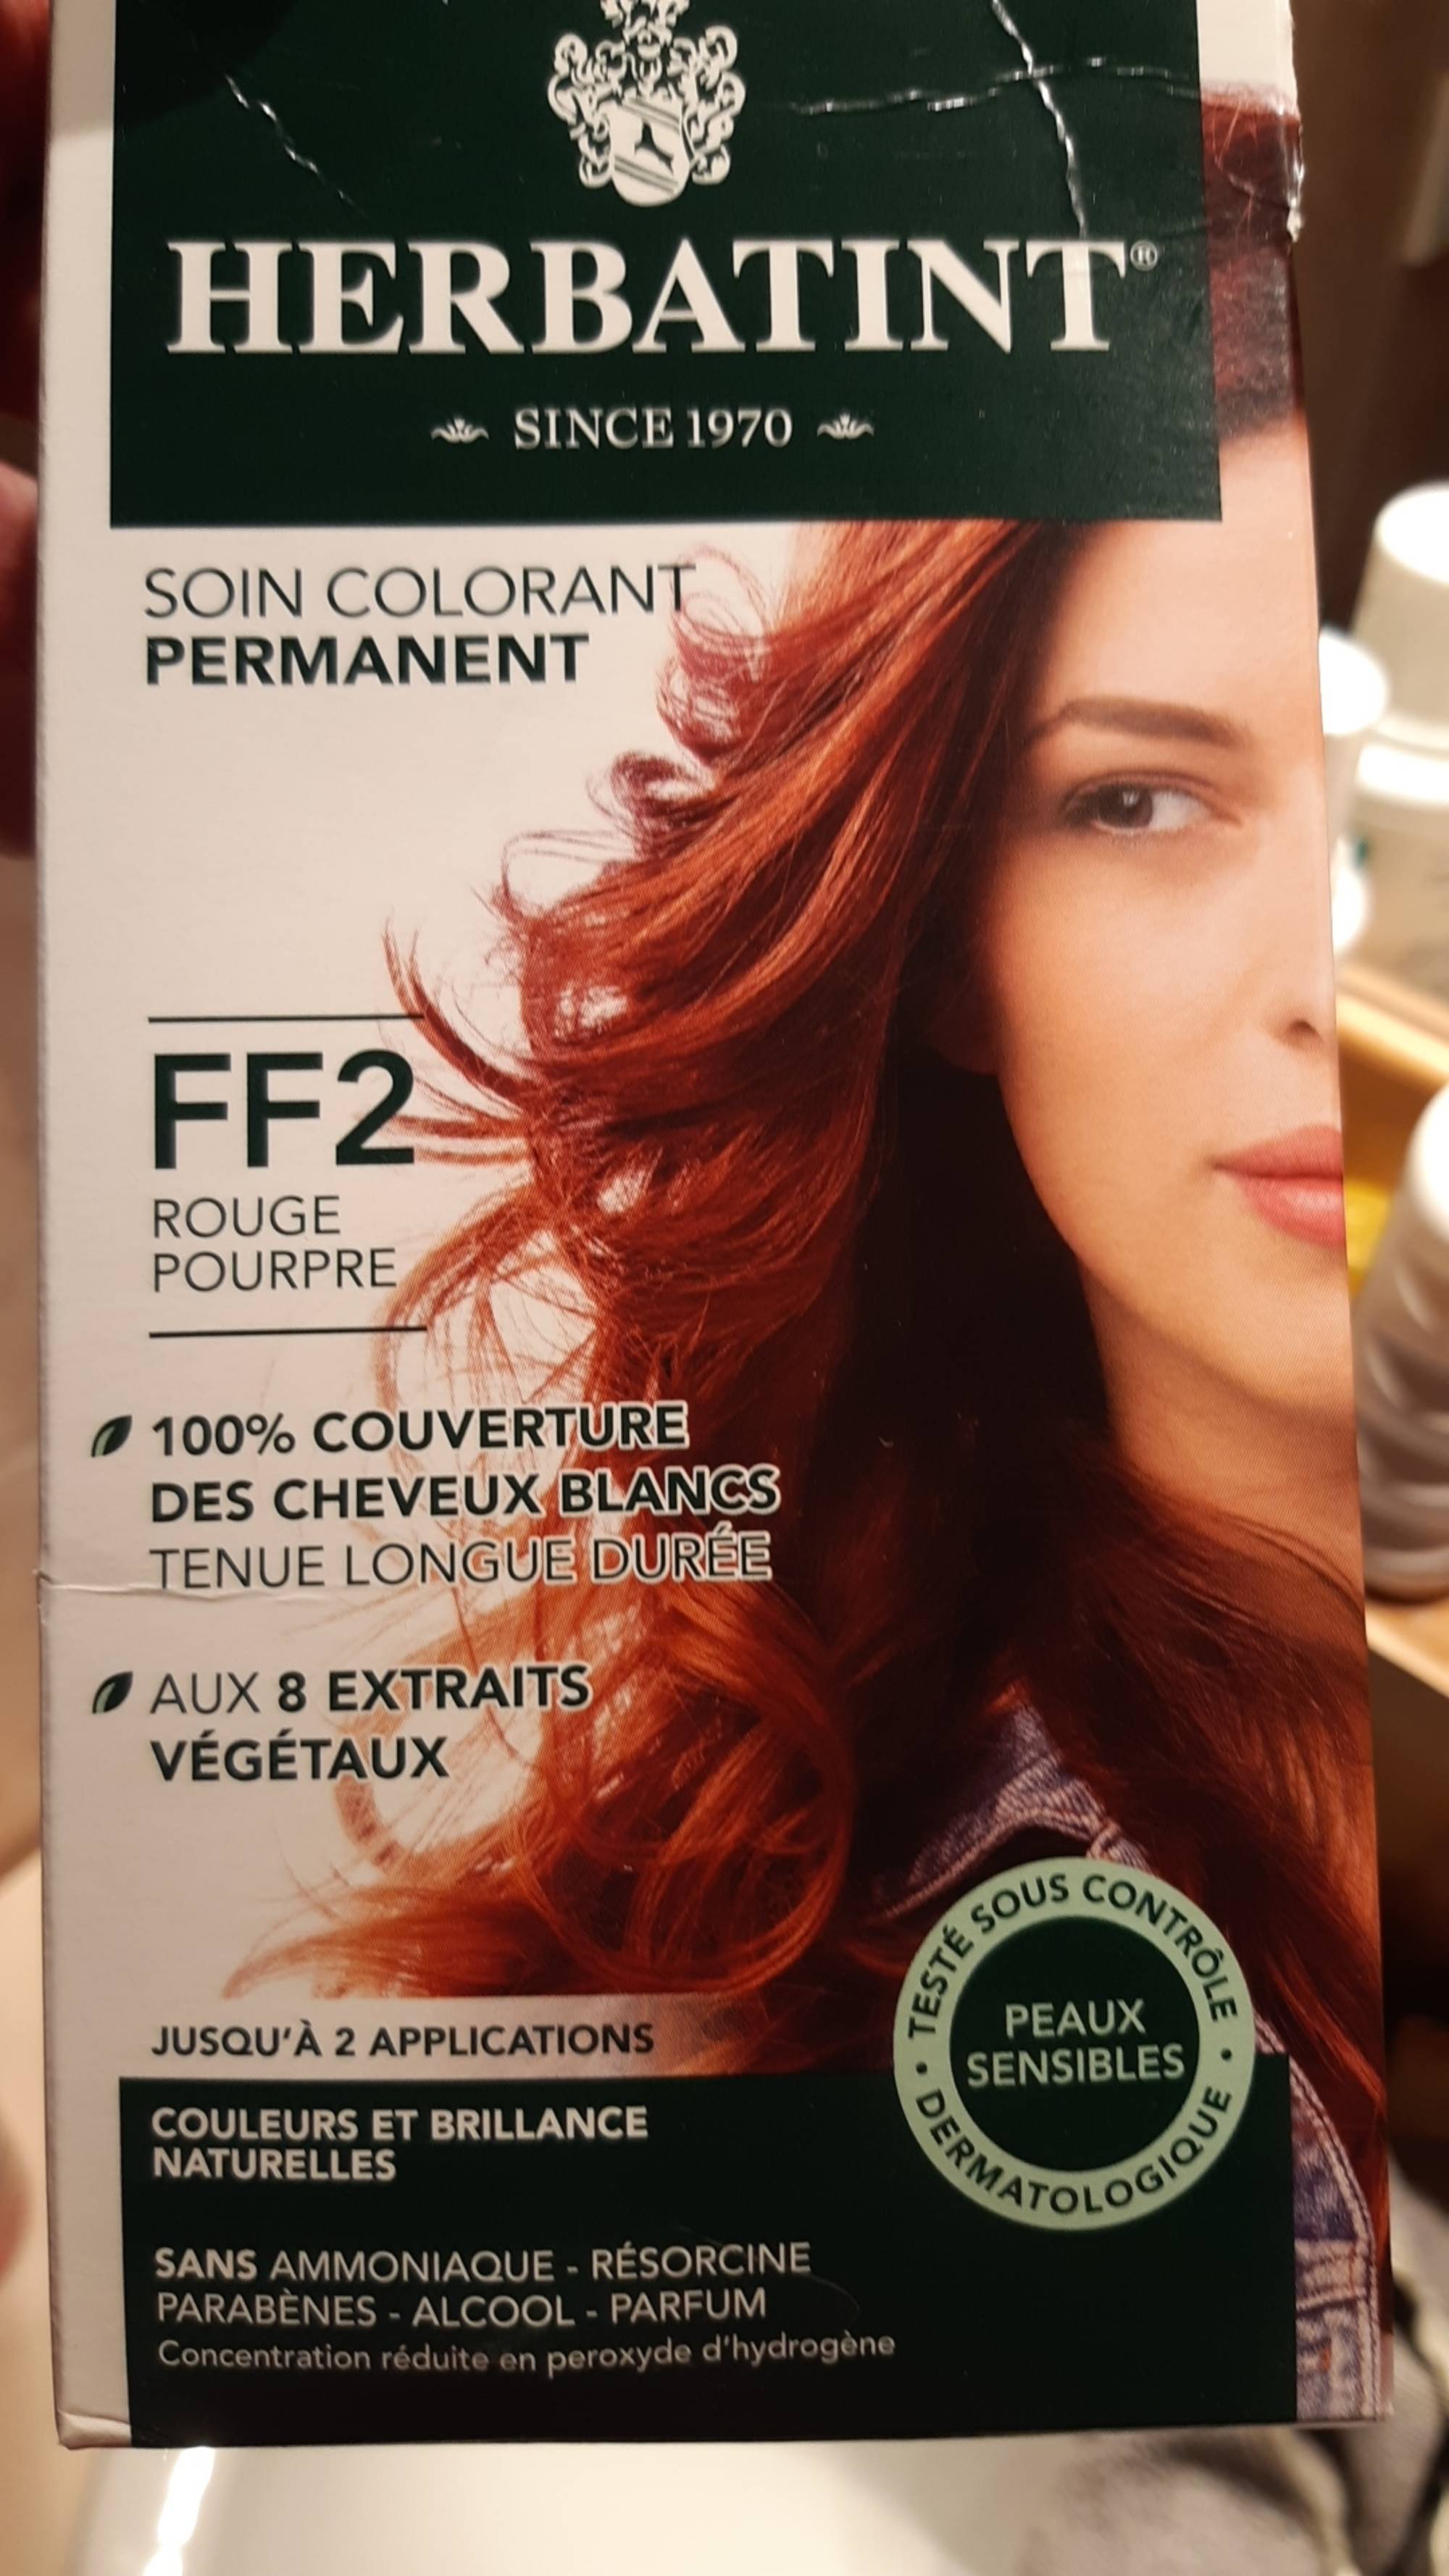 HERBATINT - Soin colorant permanent - FF2 rouge pourpre